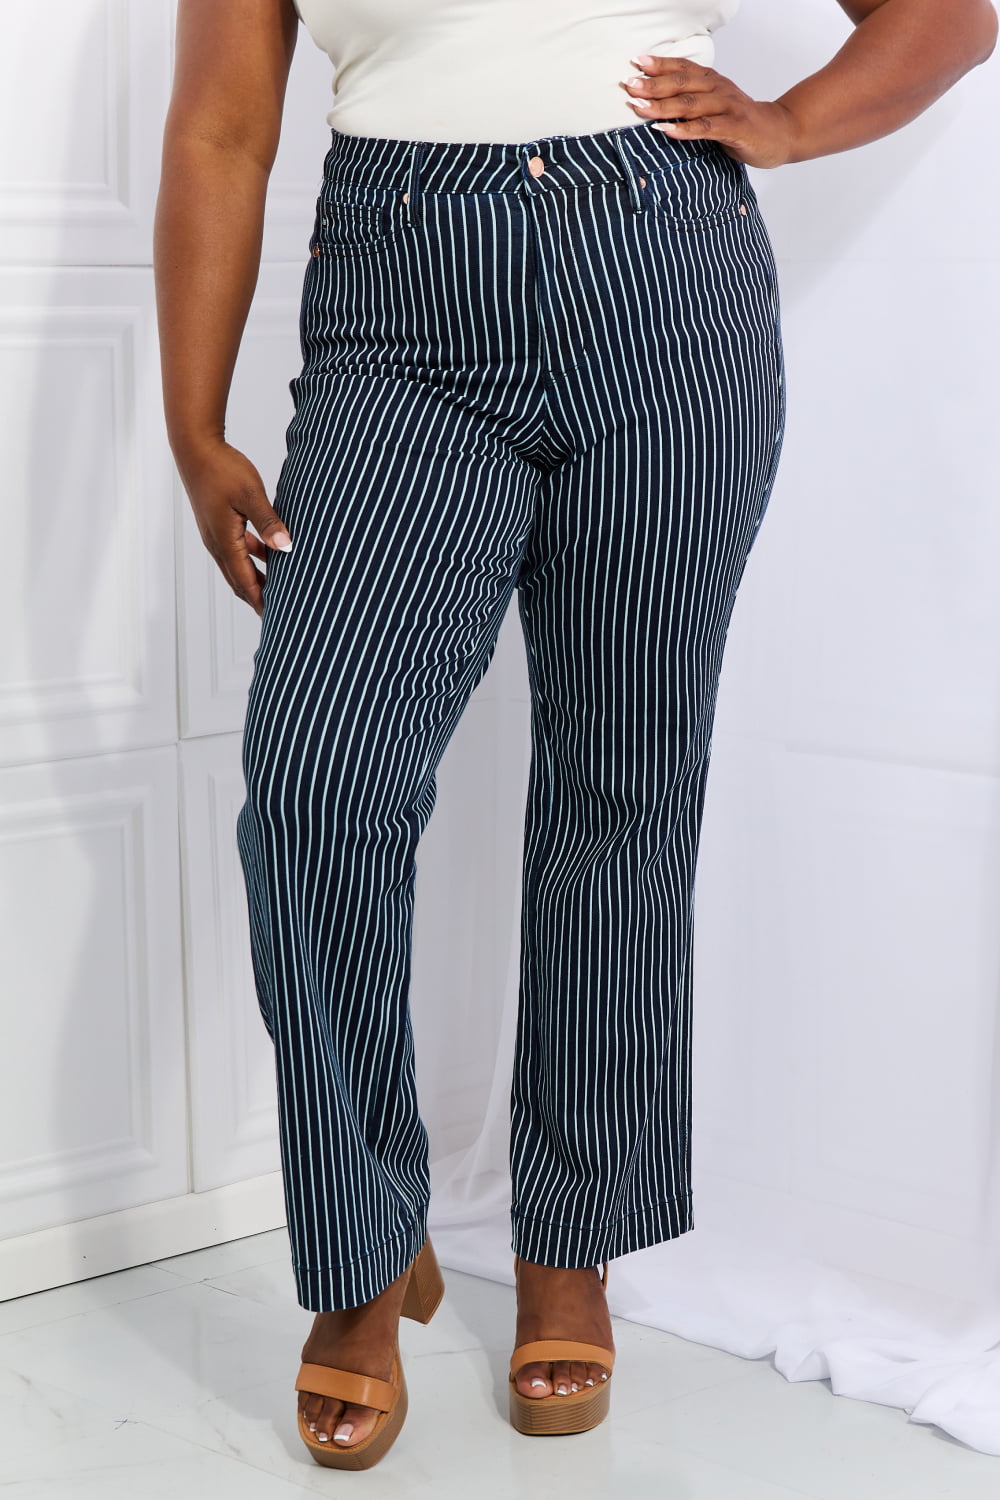 Judy Blue Cassidy Full Size High Waisted Tummy Control Striped Straight Jeans-Denim-Inspired by Justeen-Women's Clothing Boutique in Chicago, Illinois